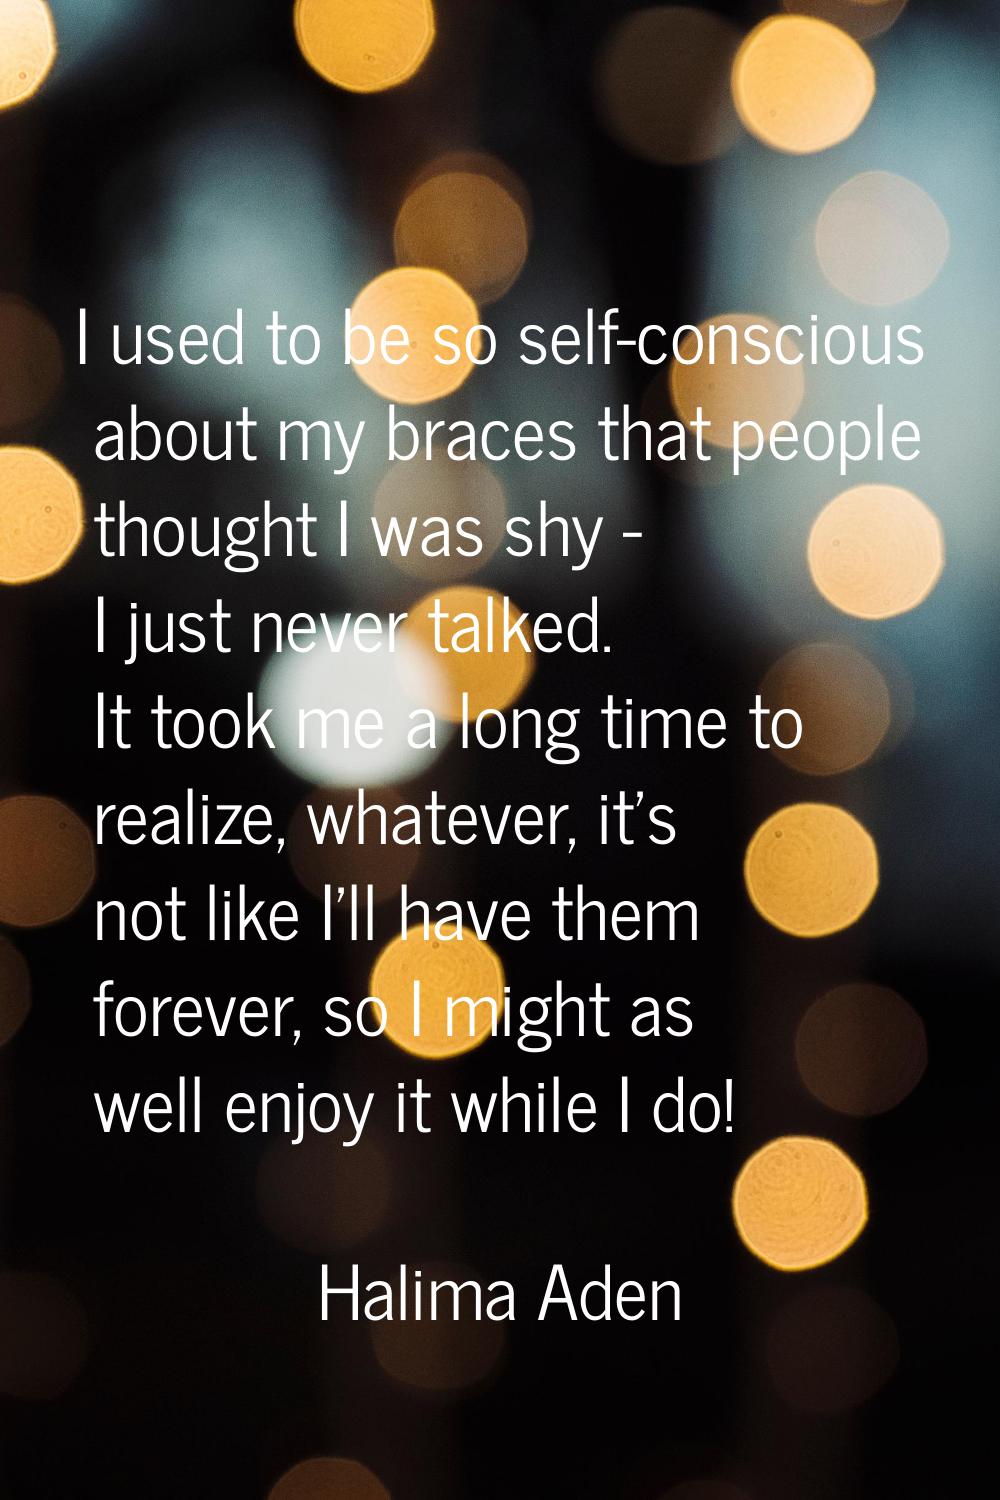 I used to be so self-conscious about my braces that people thought I was shy - I just never talked.